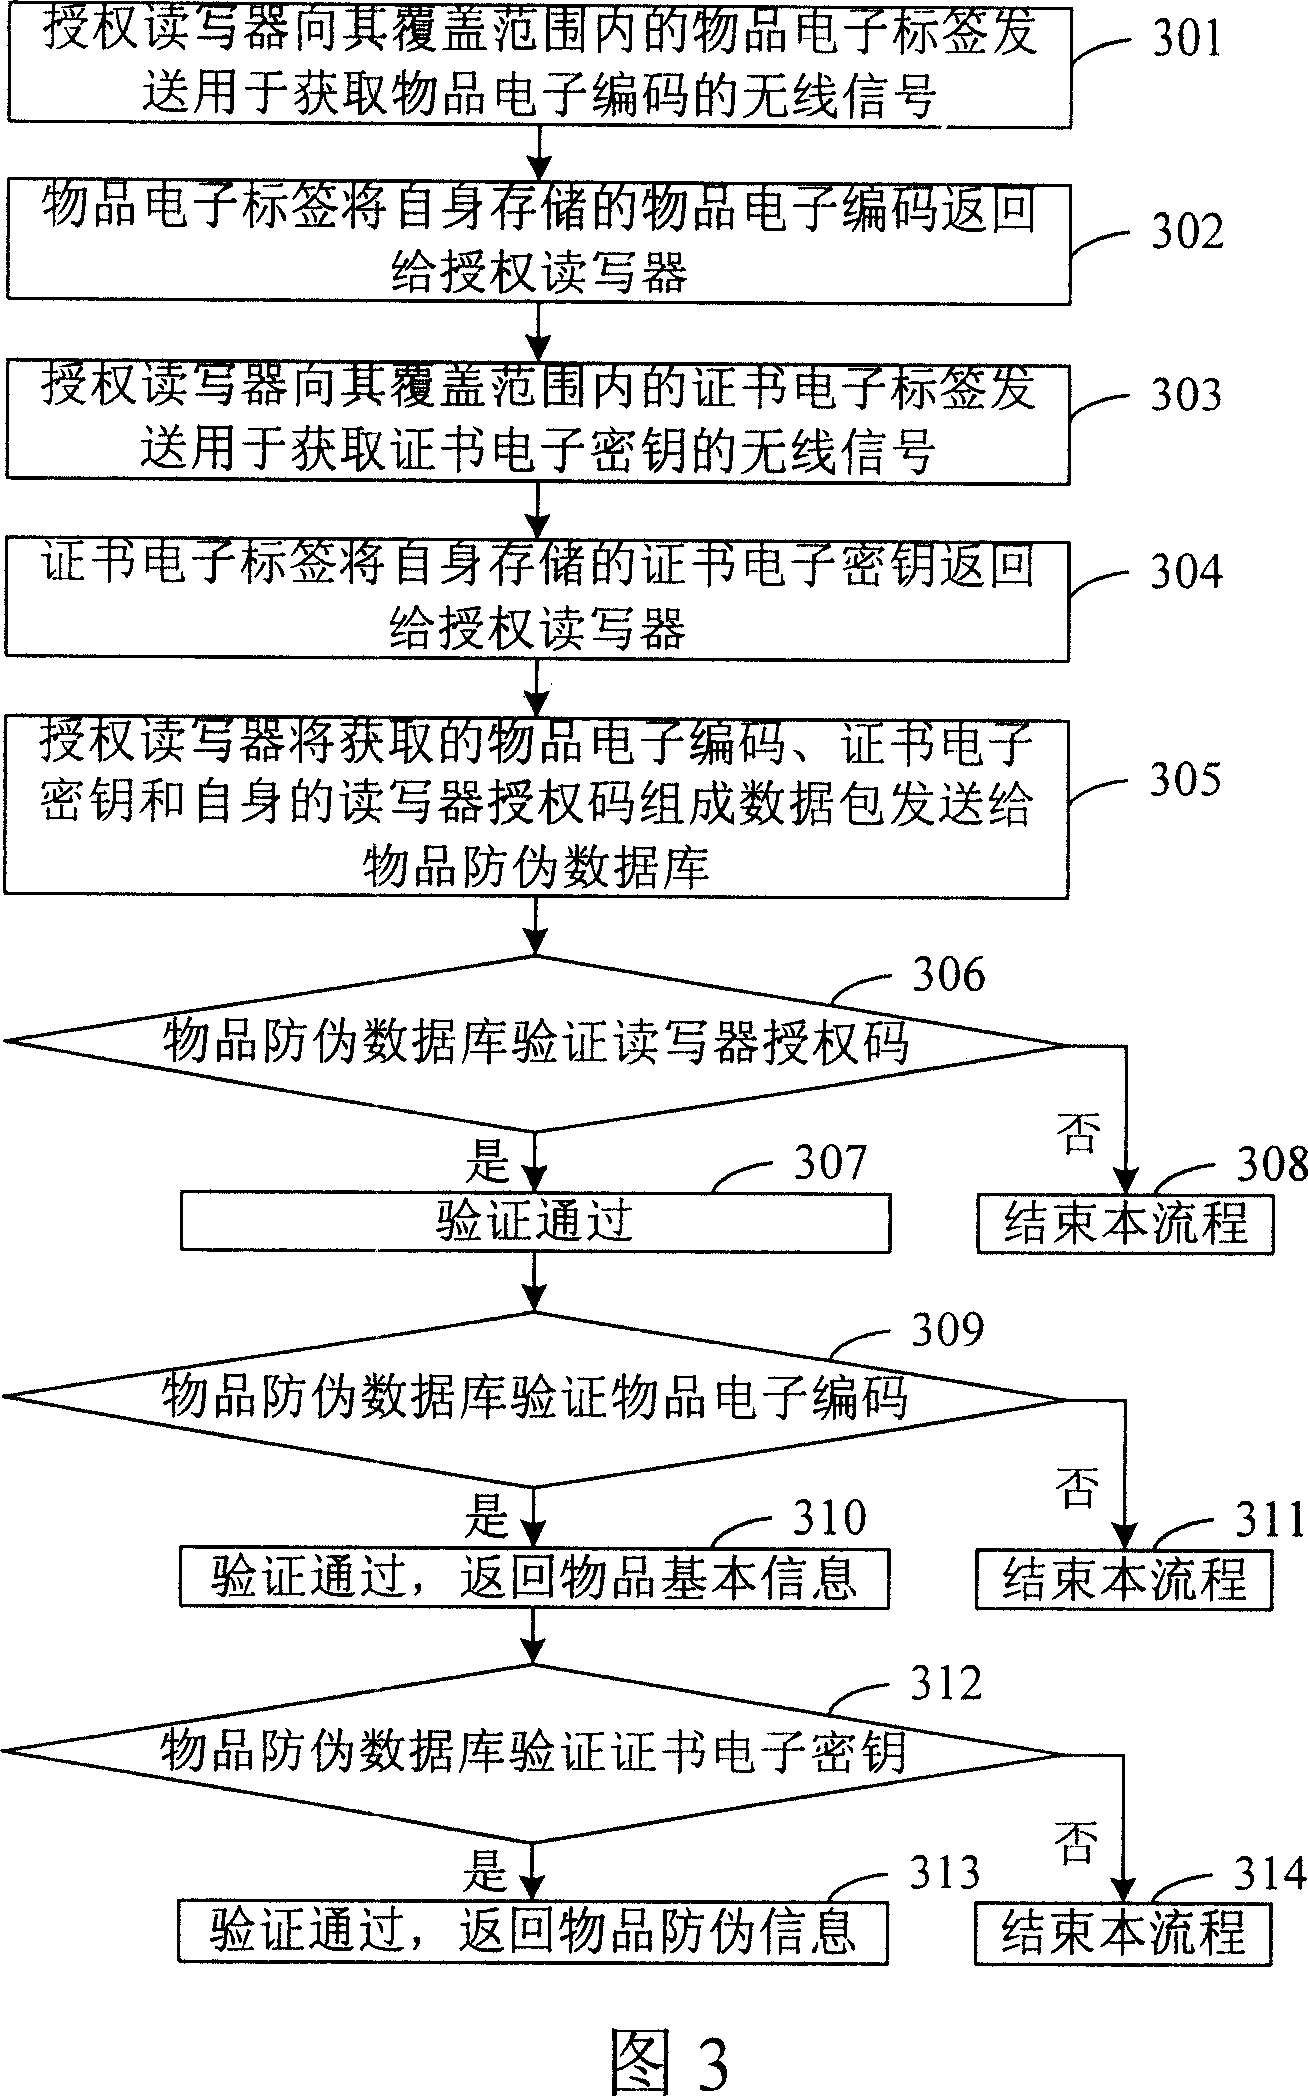 System and method for antiforge of article with certificate based on radio frequency technology